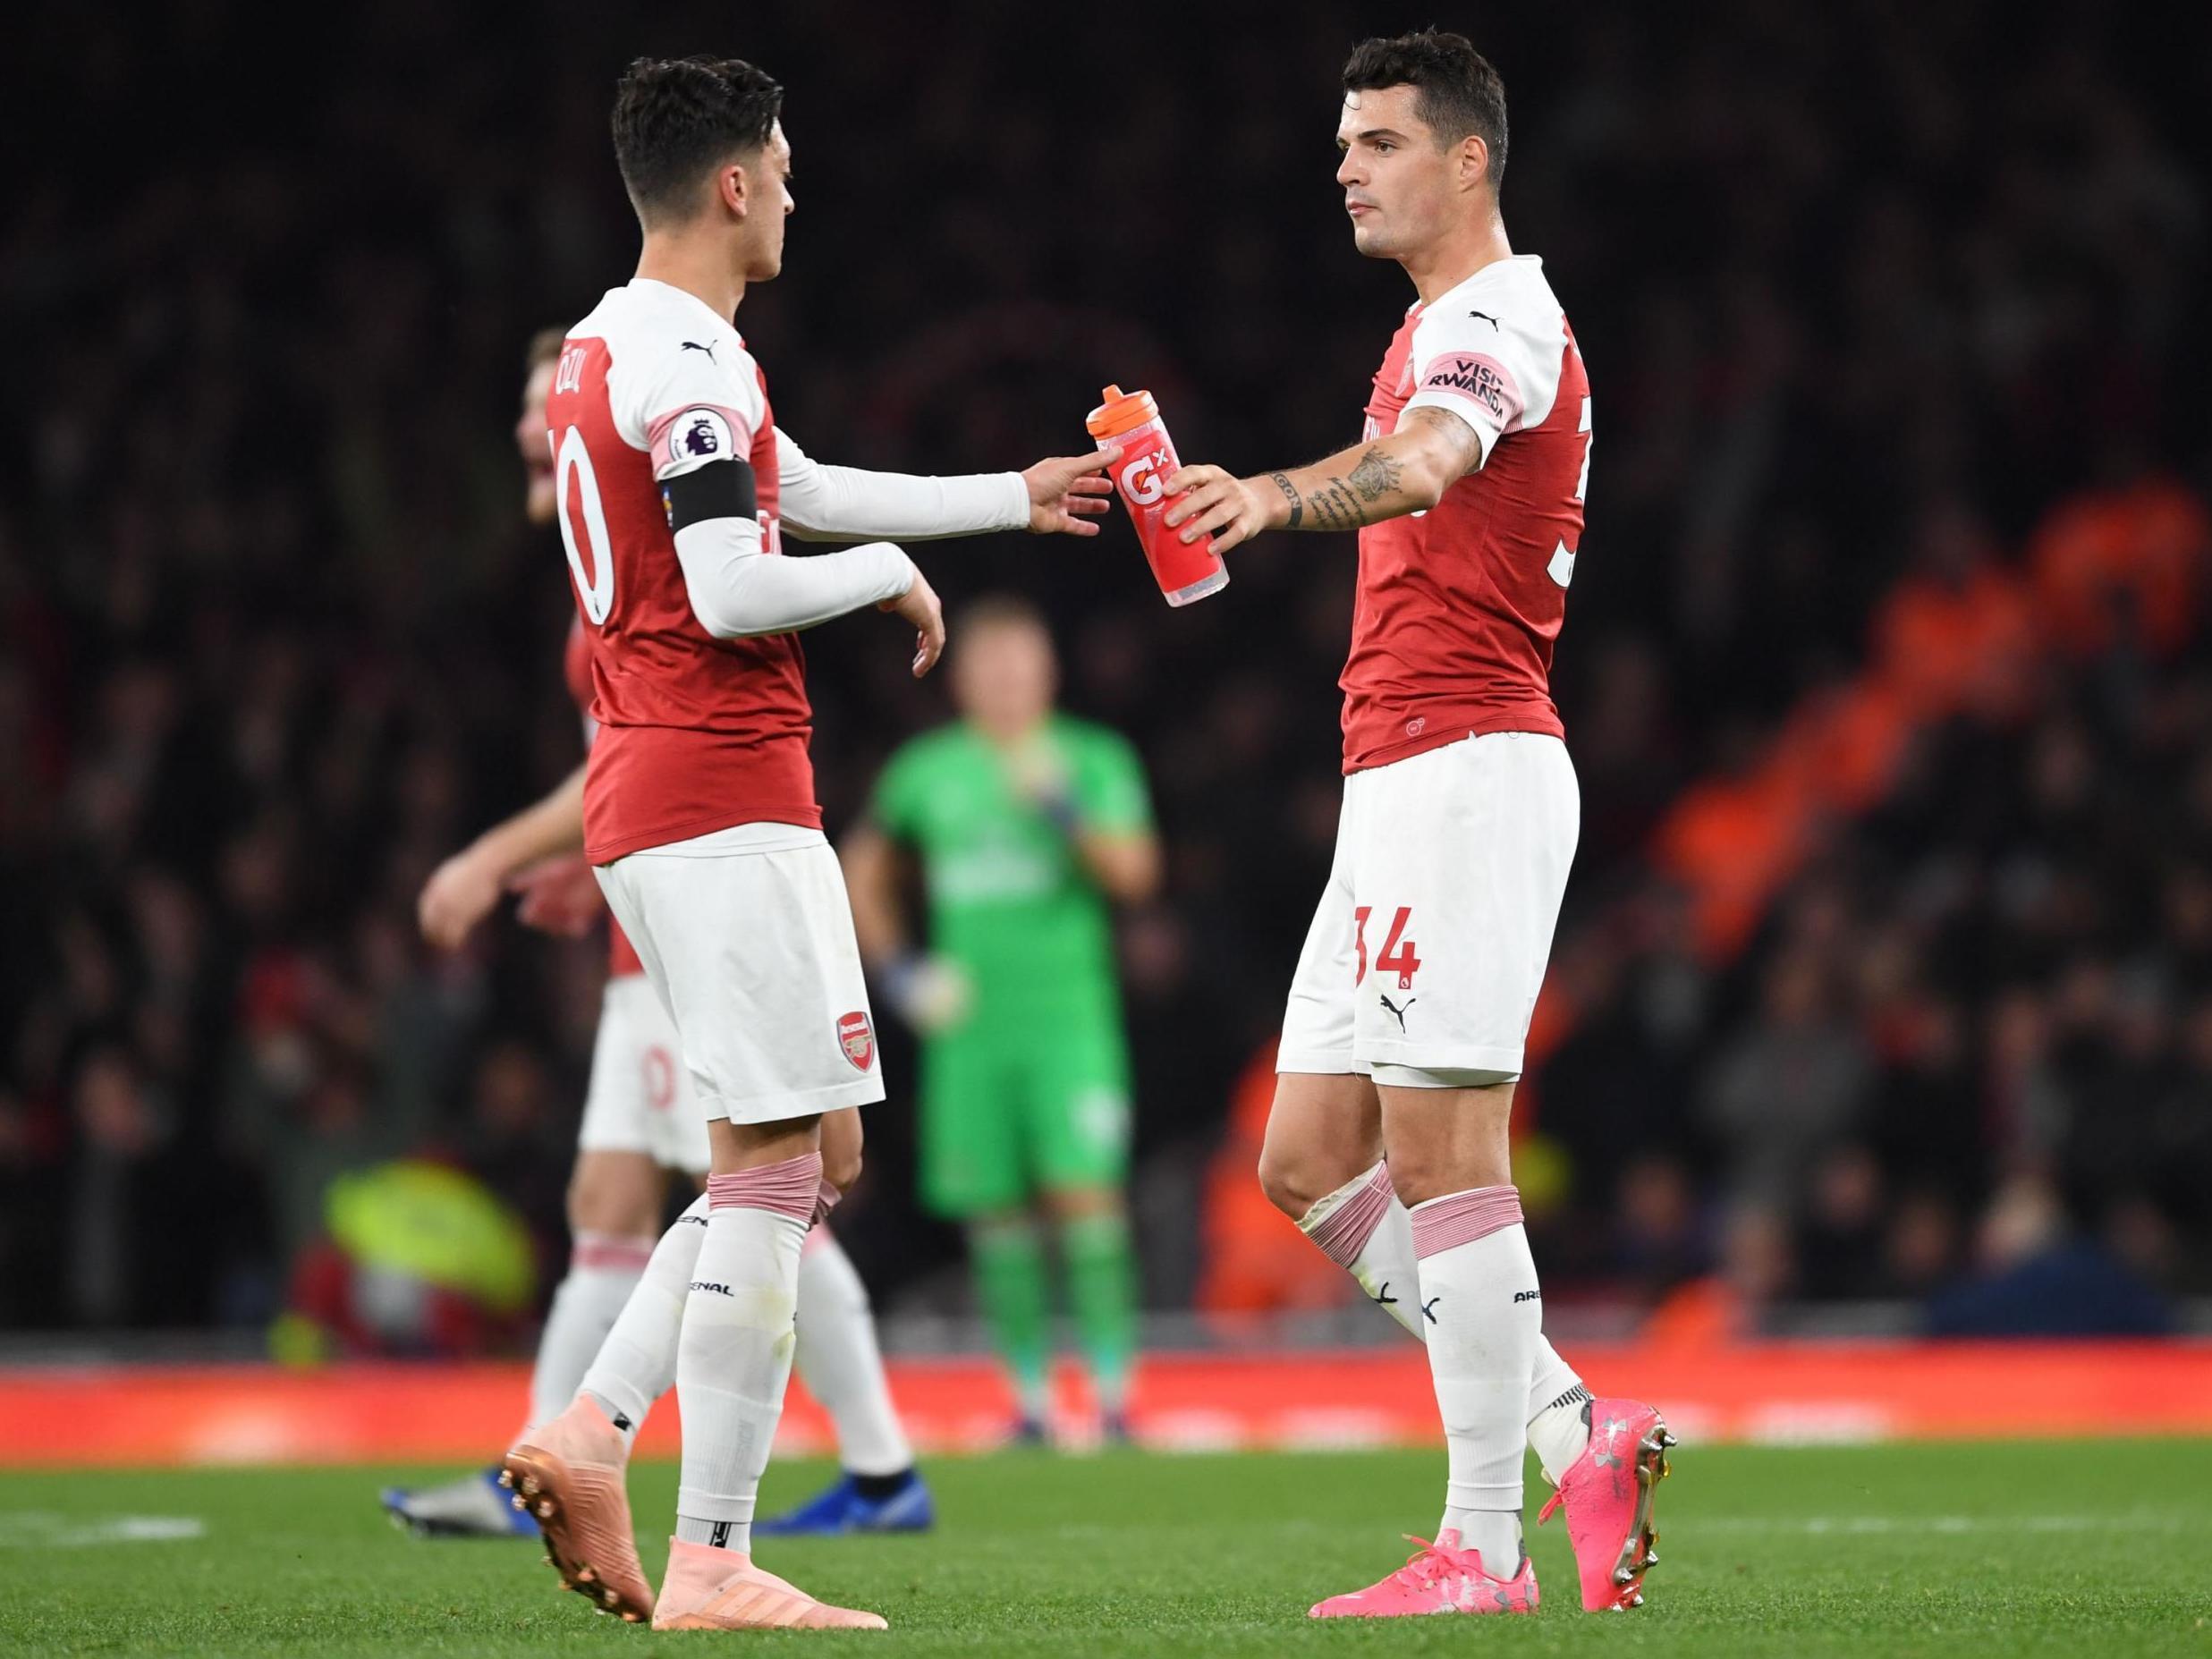 Unai Emery and Lucas Torreira are bringing the best out of Granit